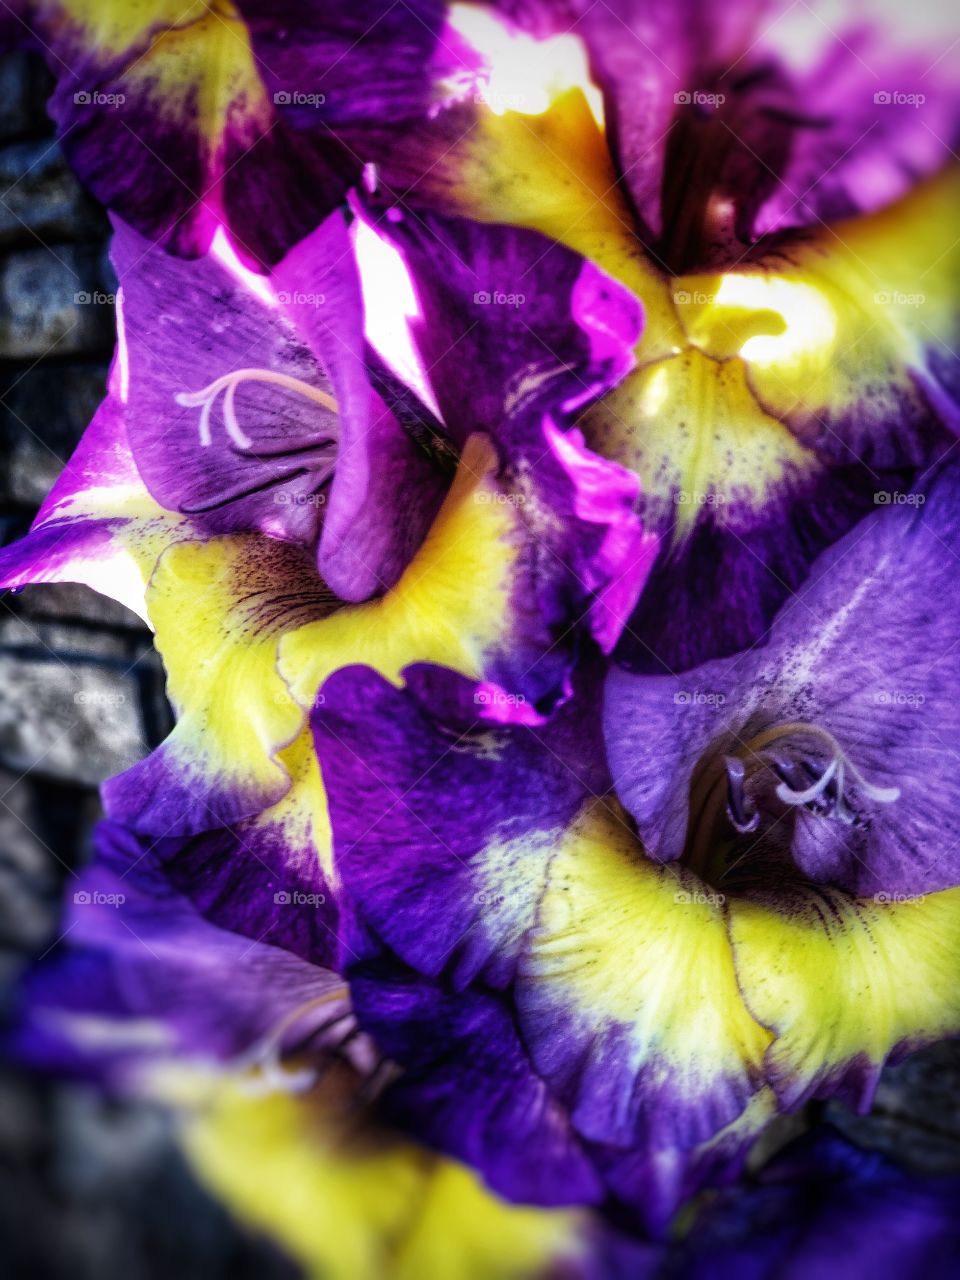 Unique Purple and Yellow Gladiolas! Canvas Art, Wall Decor, Hotel Wall Decor, Horticulture Art, Beautiful Botanicals 